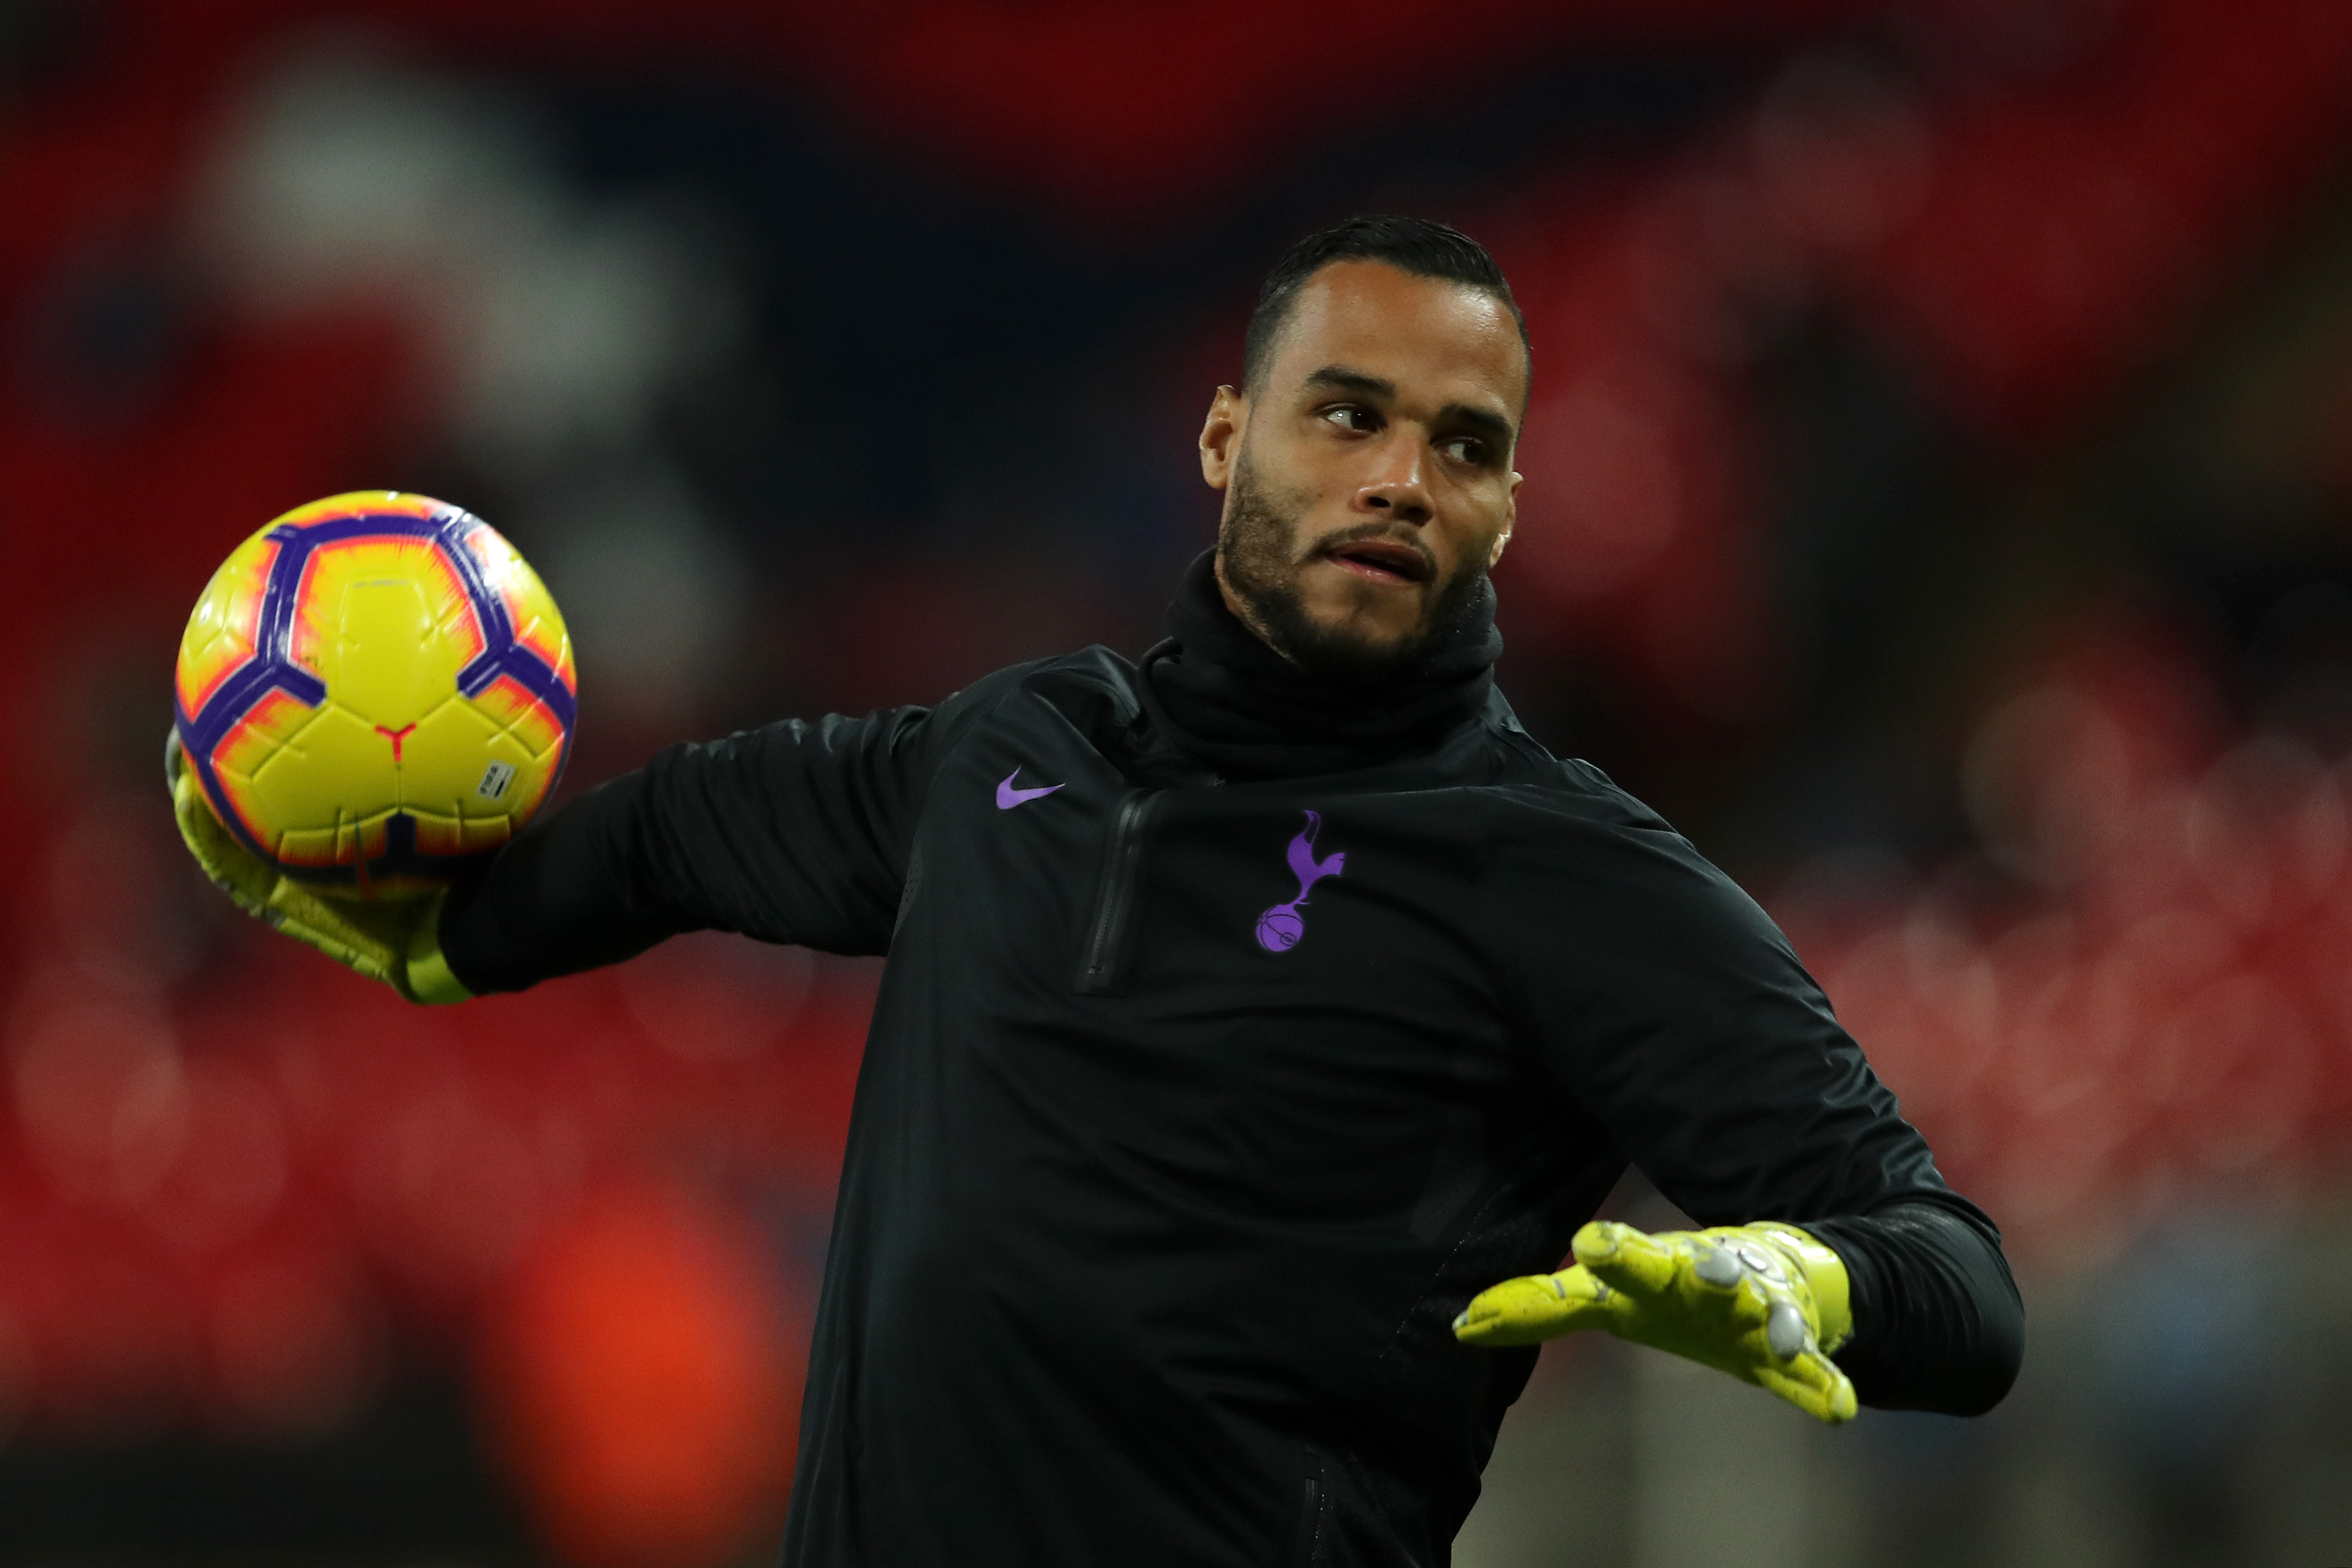 LONDON, ENGLAND - OCTOBER 29:  Michel Vorm of Tottenham Hotspur warms up prior to the Premier League match between Tottenham Hotspur and Manchester City at Tottenham Hotspur Stadium on October 29, 2018 in London, United Kingdom.  (Photo by Richard Heathcote/Getty Images)